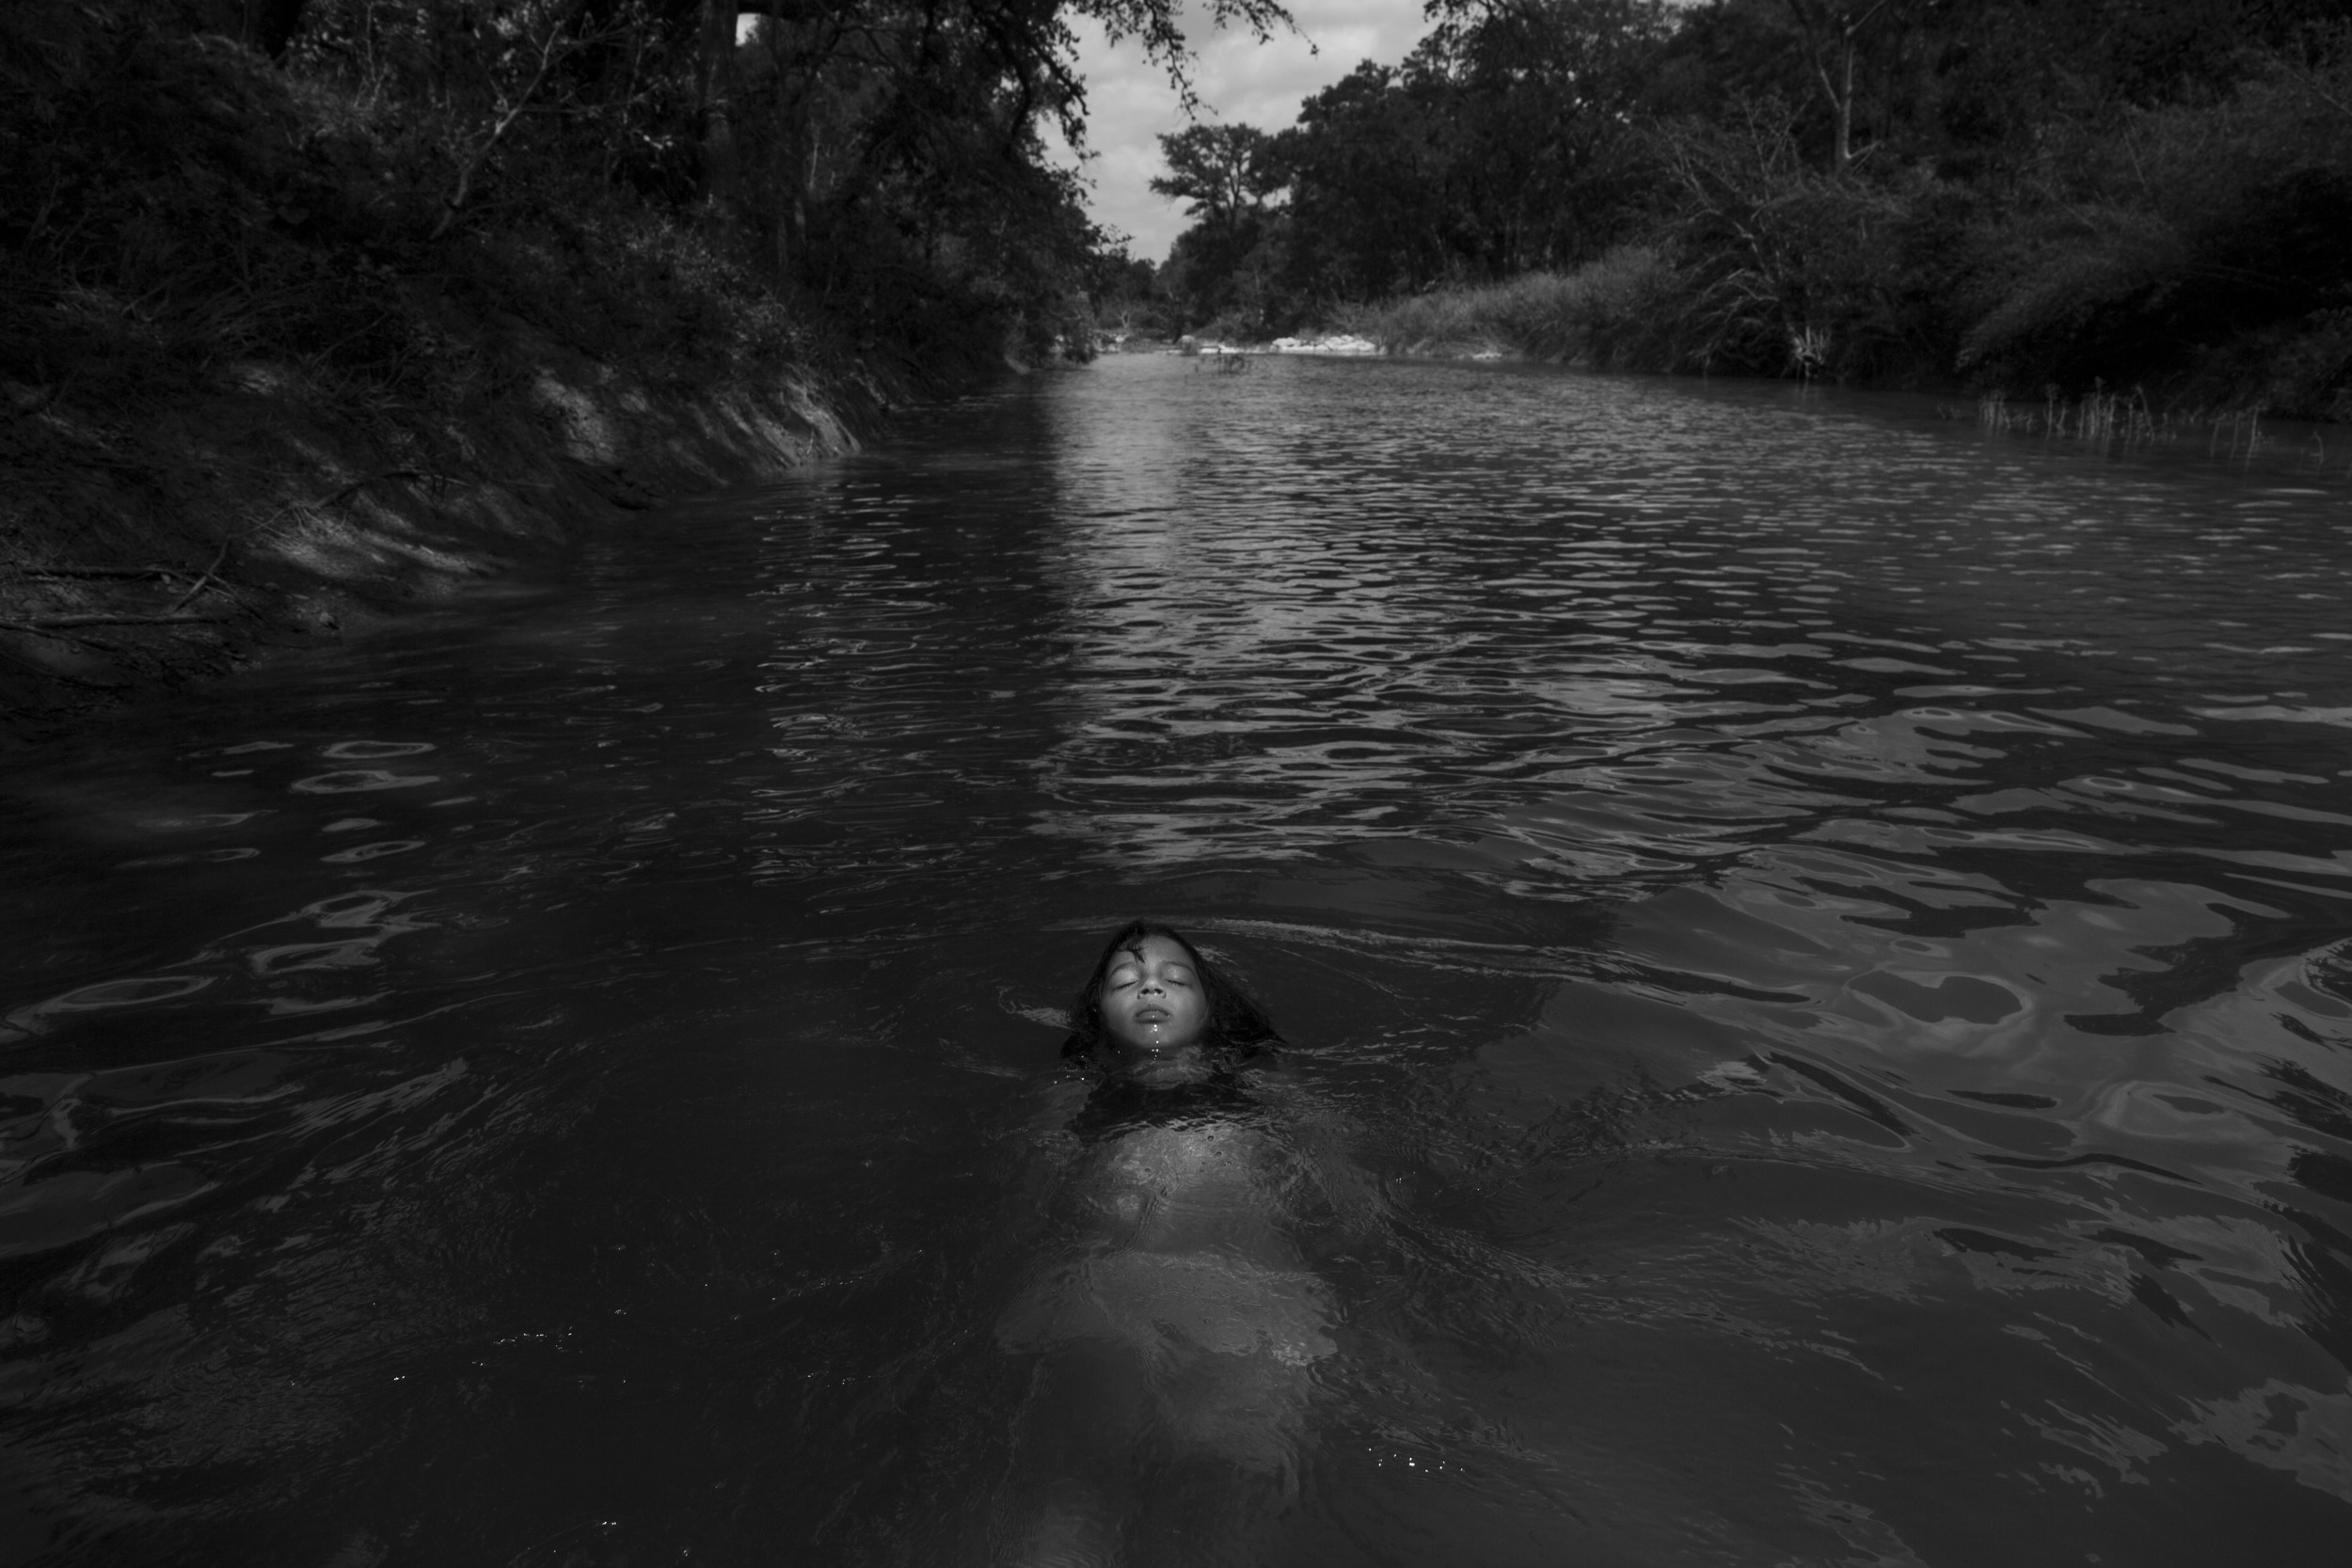 Photo by Carolyn Van Houten. "Serenity Bamberger floats in the Little Blanco River along their property on August 18, 2015 in Blanco, Texas. Three months prior, over Memorial Day, the same river flooded their home and business destroying the majority of the family's belongings and source of income. The Memorial Day weekend flooding, which affected Texas and Oklahoma, killed 24 people according to The Associated Press."